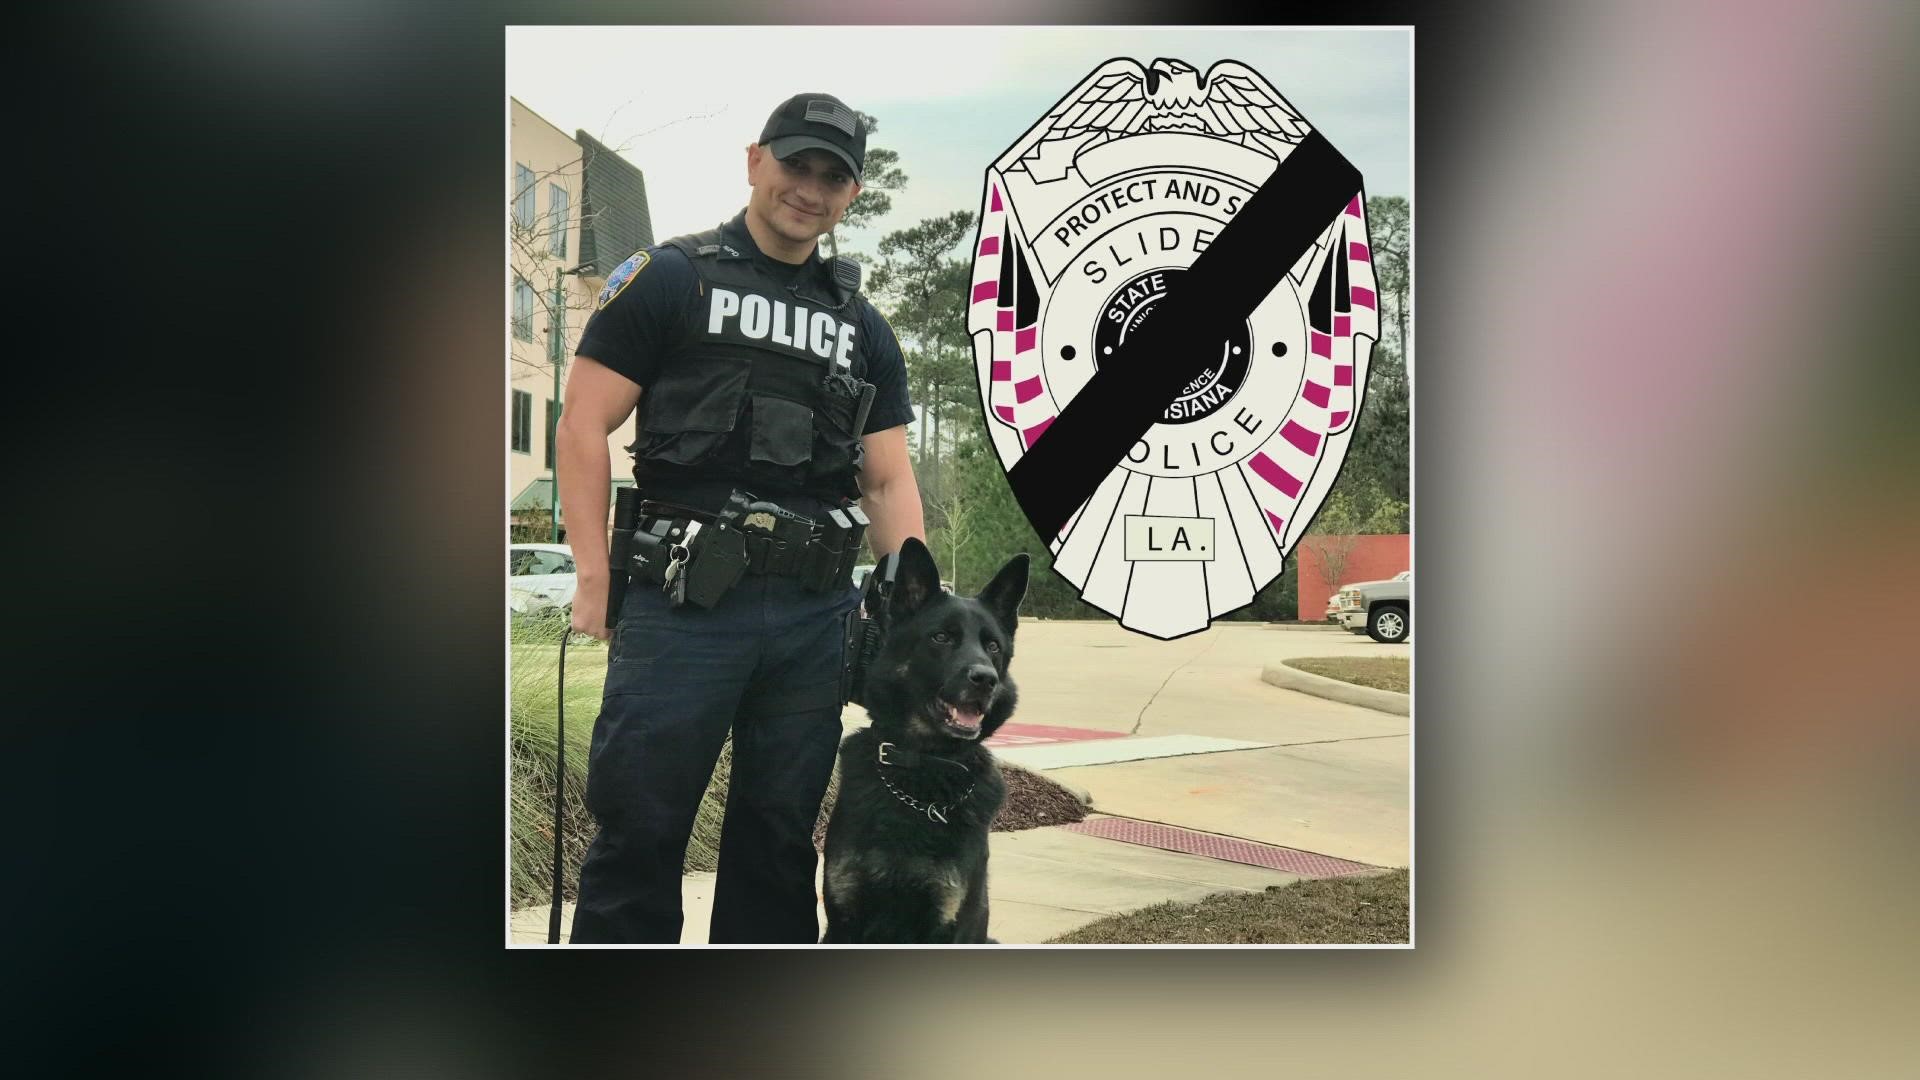 A Slidell Police K-9 died on duty Thursday after chasing a suspect. The dog was rushed to the vet where it was determined he had cancer.